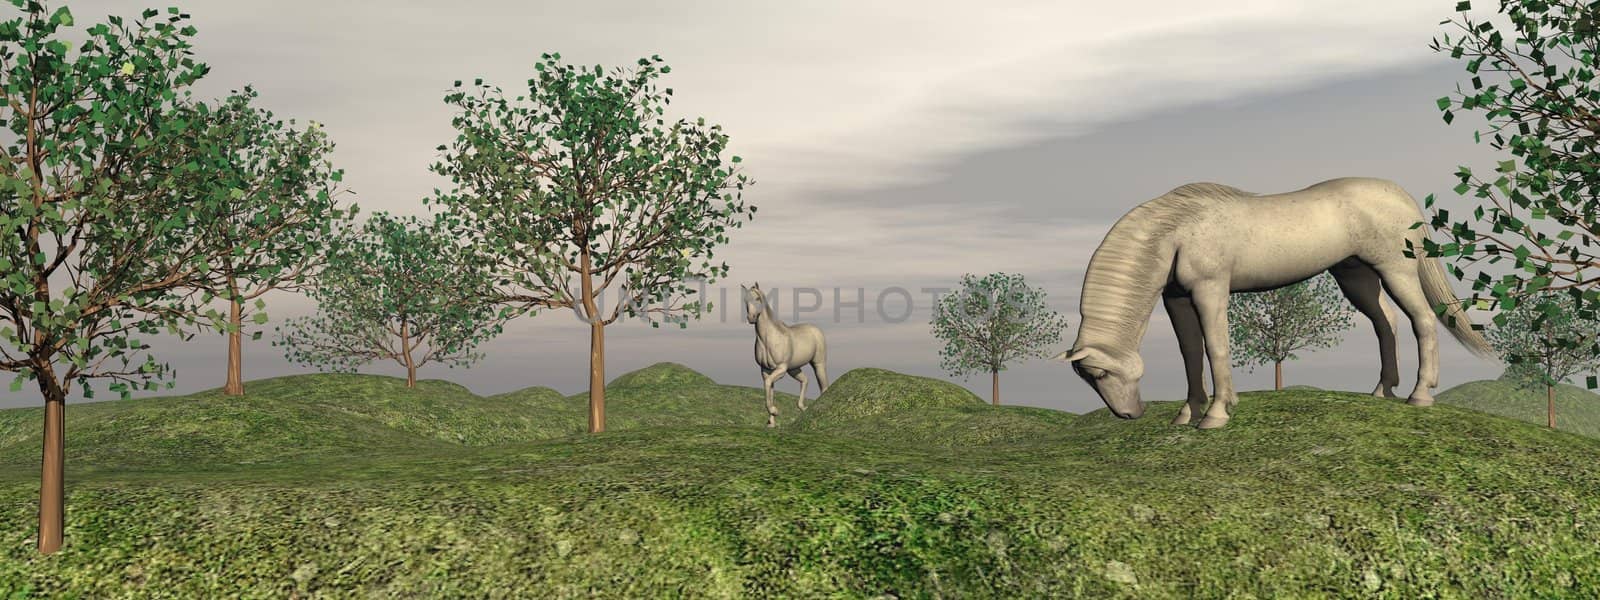 Two fleabitten grey horses in nature among trees